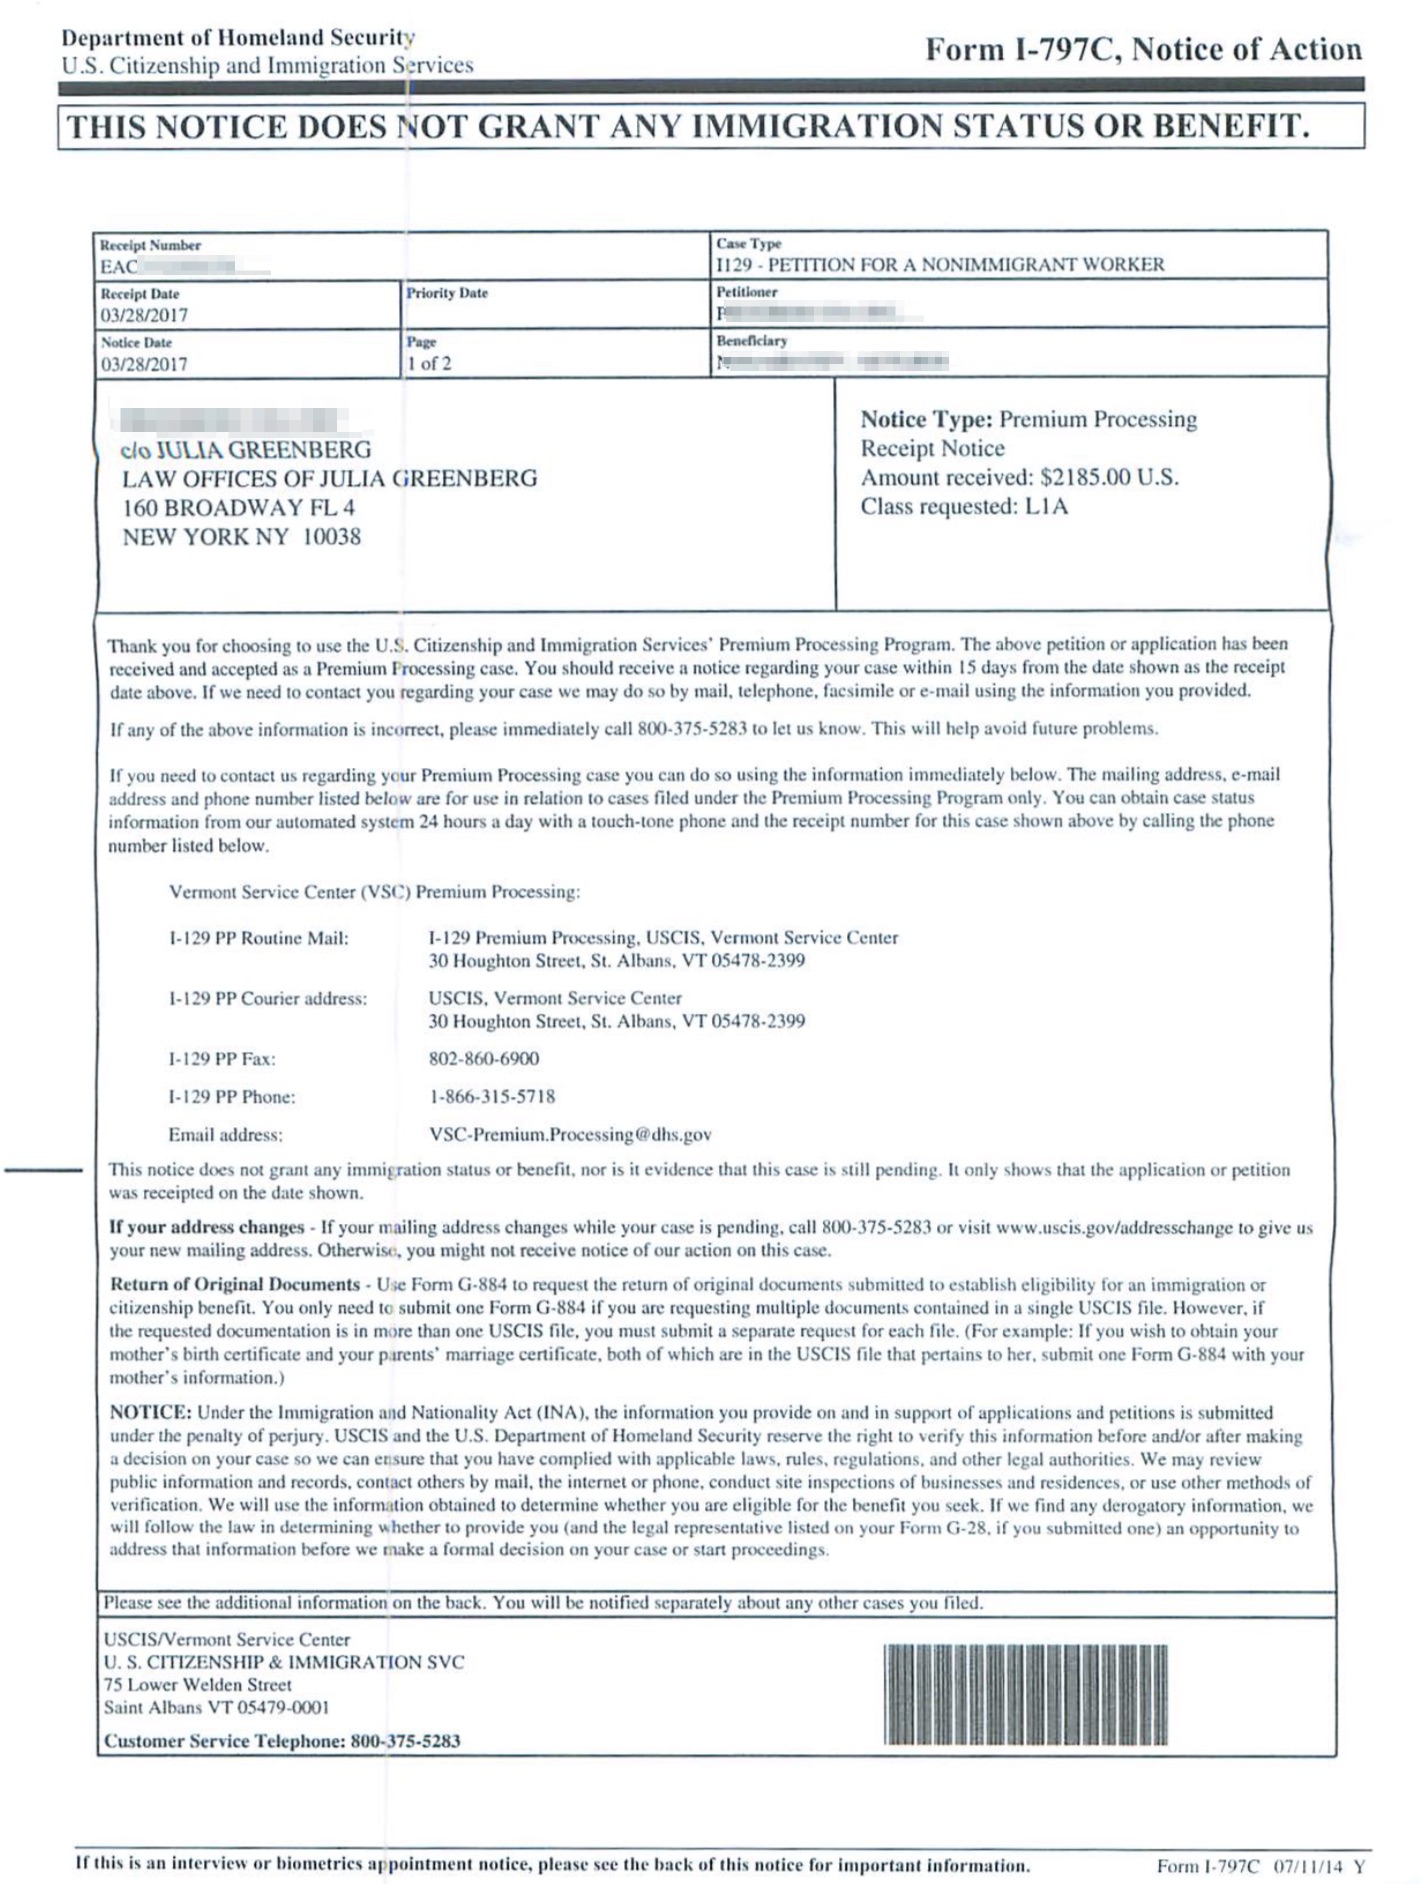 uscis-form-i-797c-printable-images-and-photos-finder